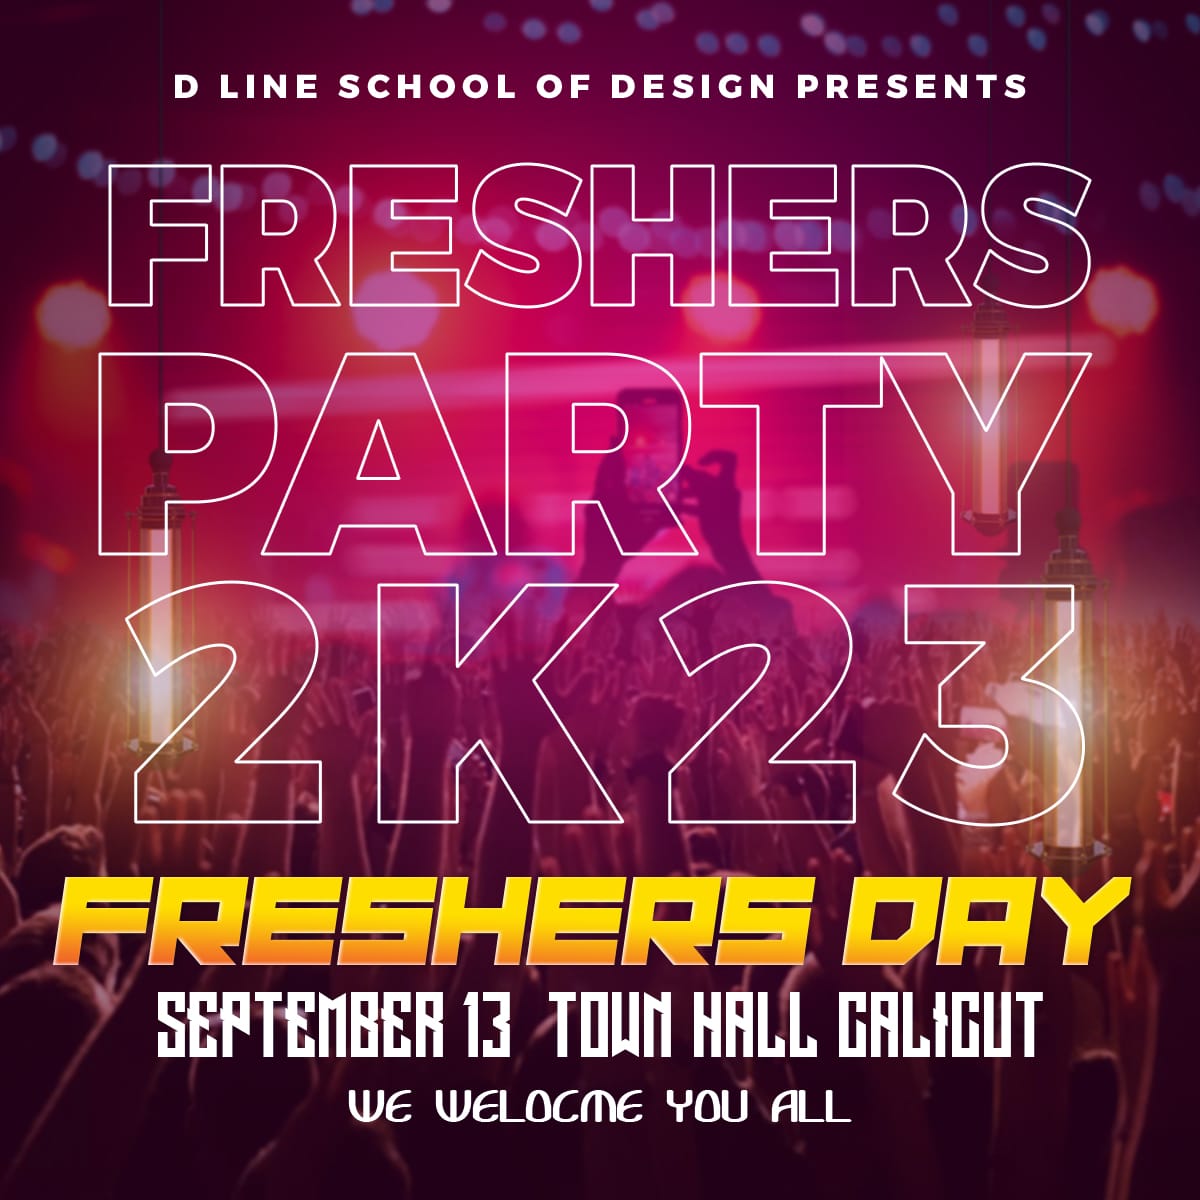 D line fresher day